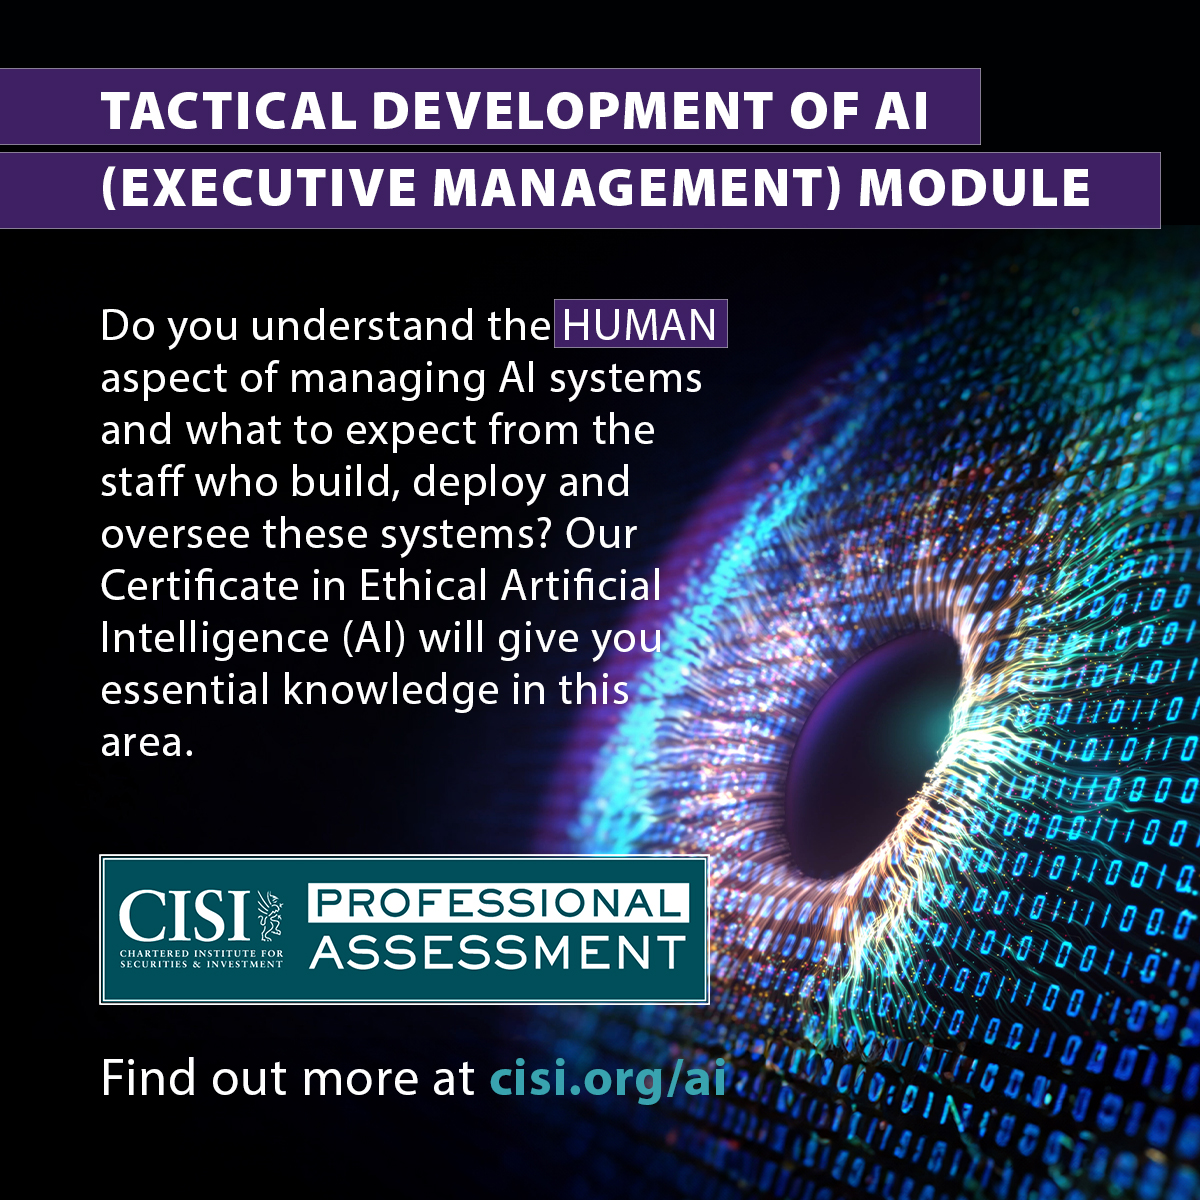 Utilising AI systems comes with challenges and requires significant resources, from a technological & a human perspective. explore the human aspect of managing AI systems & what to expect from the staff who build, deploy and oversee them: cisi.org/ai #AI